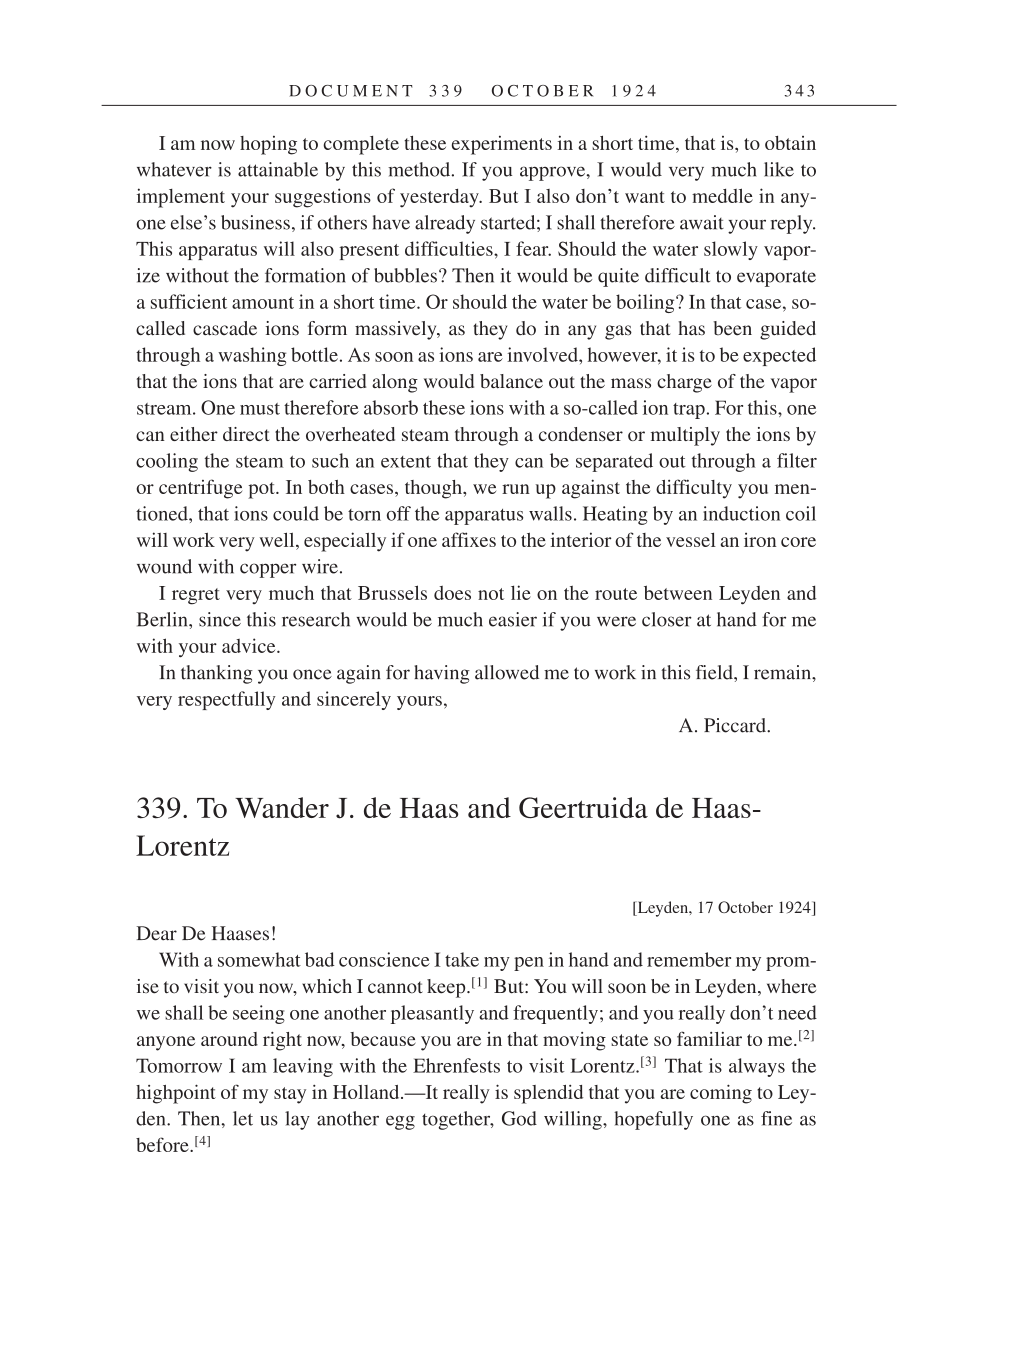 Volume 14: The Berlin Years: Writings & Correspondence, April 1923-May 1925 (English Translation Supplement) page 343